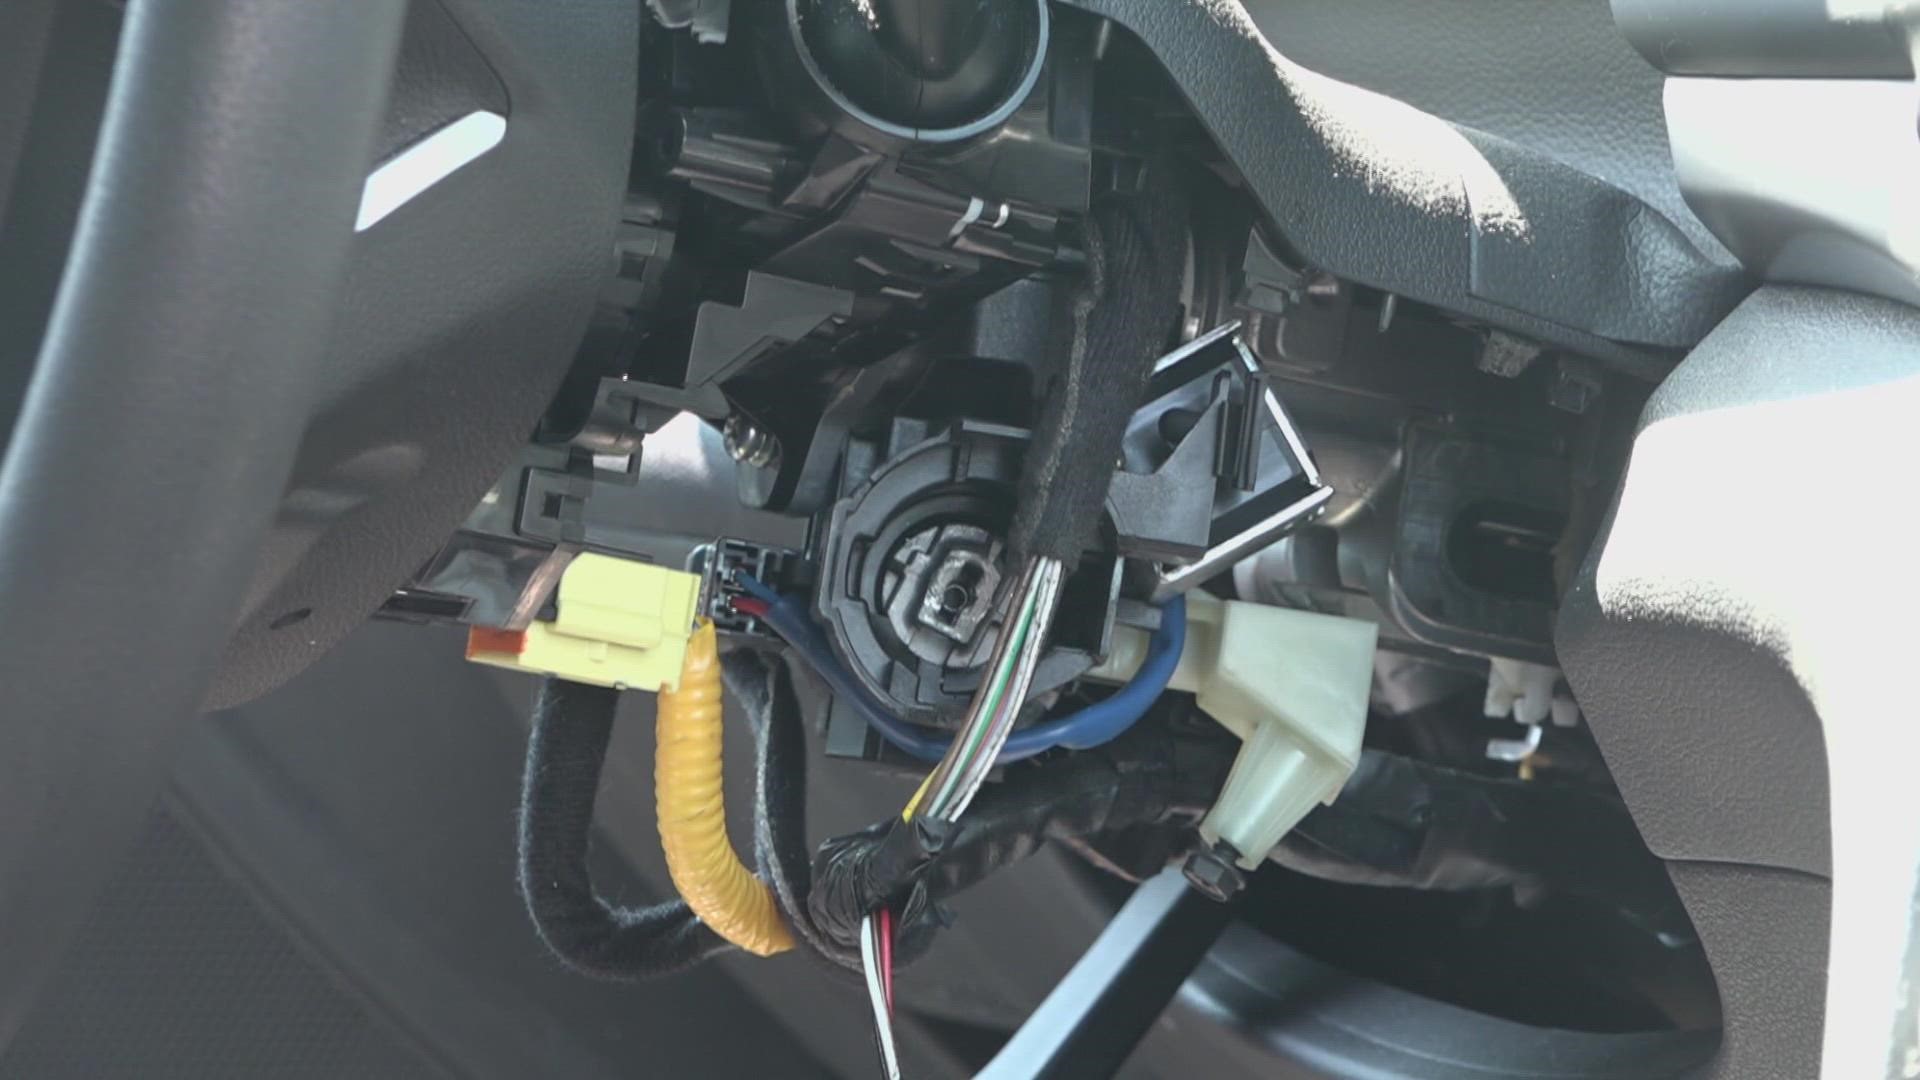 Car owners in at least seven states have filed lawsuits saying their ignition systems can be compromised with USB cords.